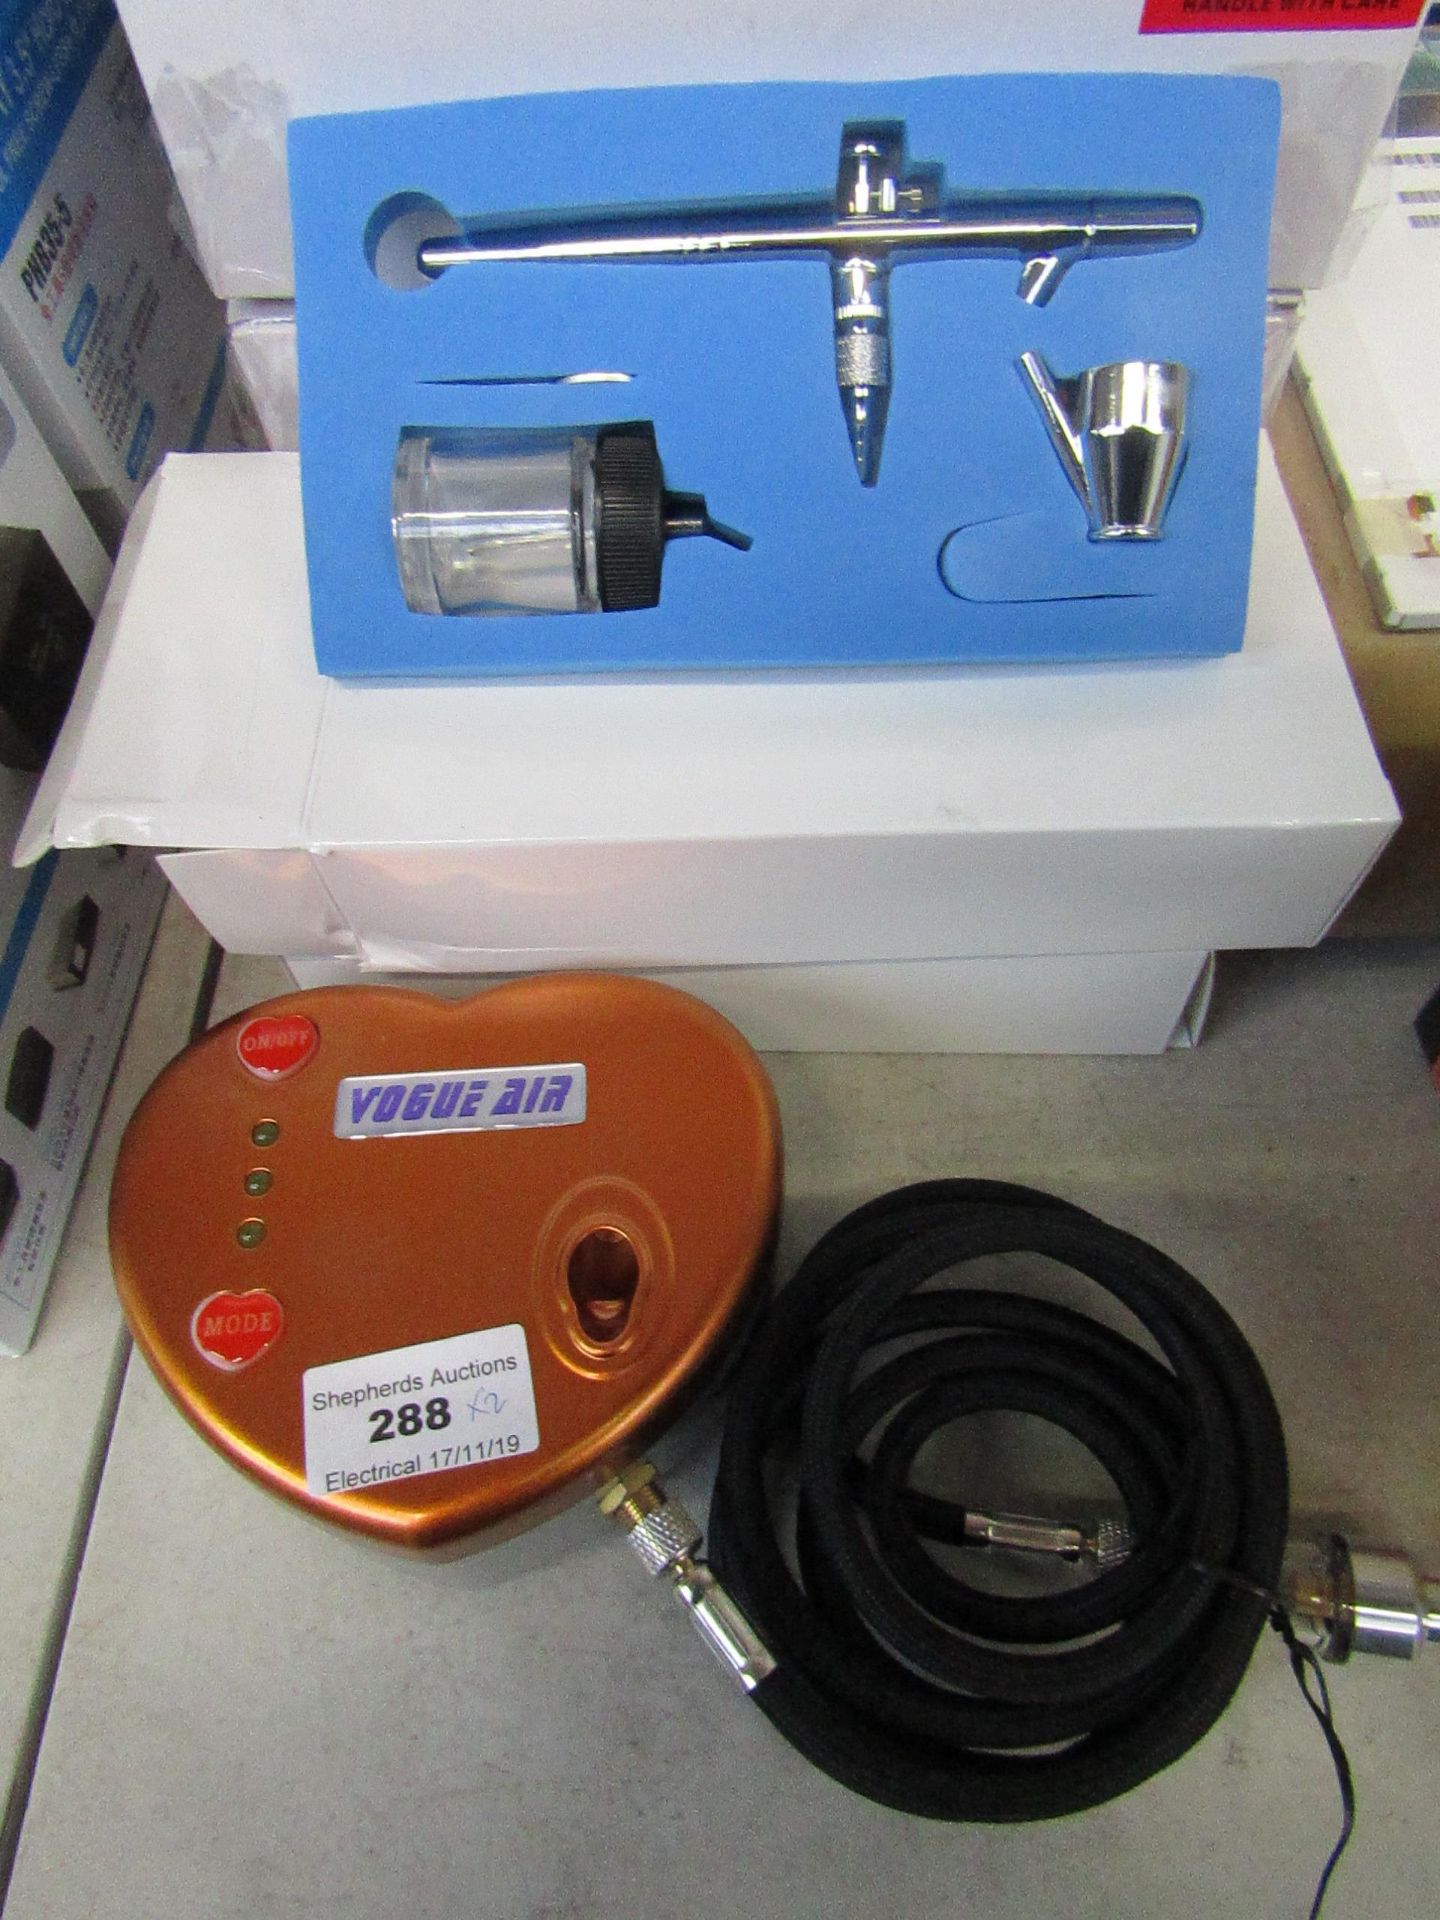 HS08-2 series battery mini air compressor, includes Air Brush, looks unused and boxed.